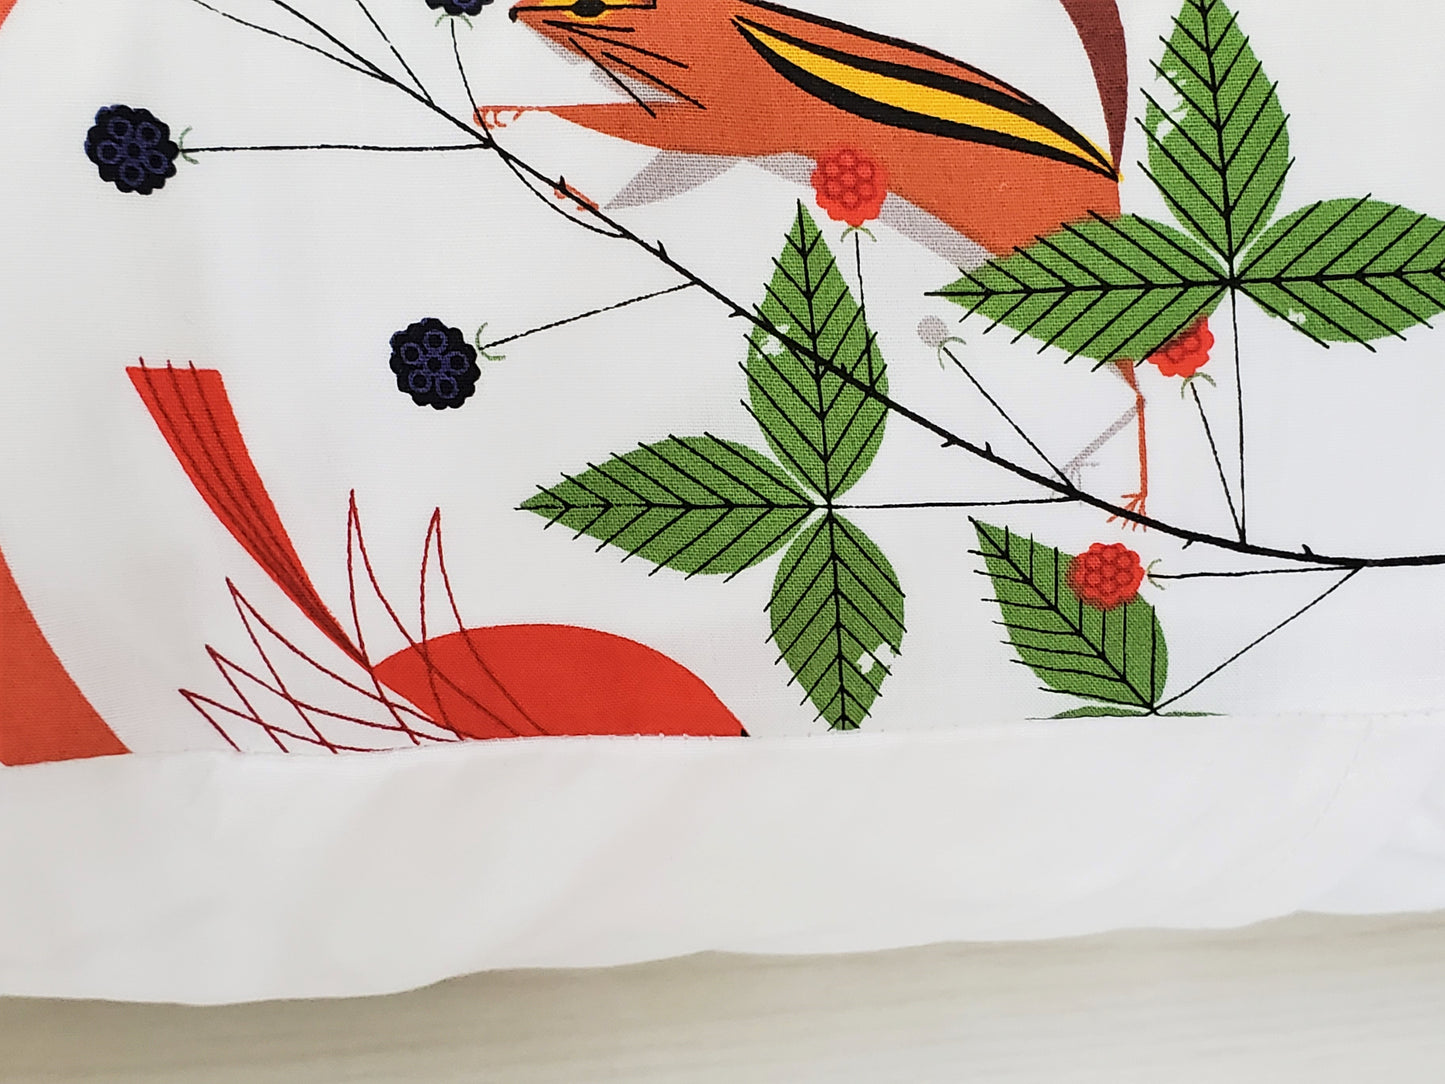 Accent Pillow Covers in Assorted Cardinal Prints